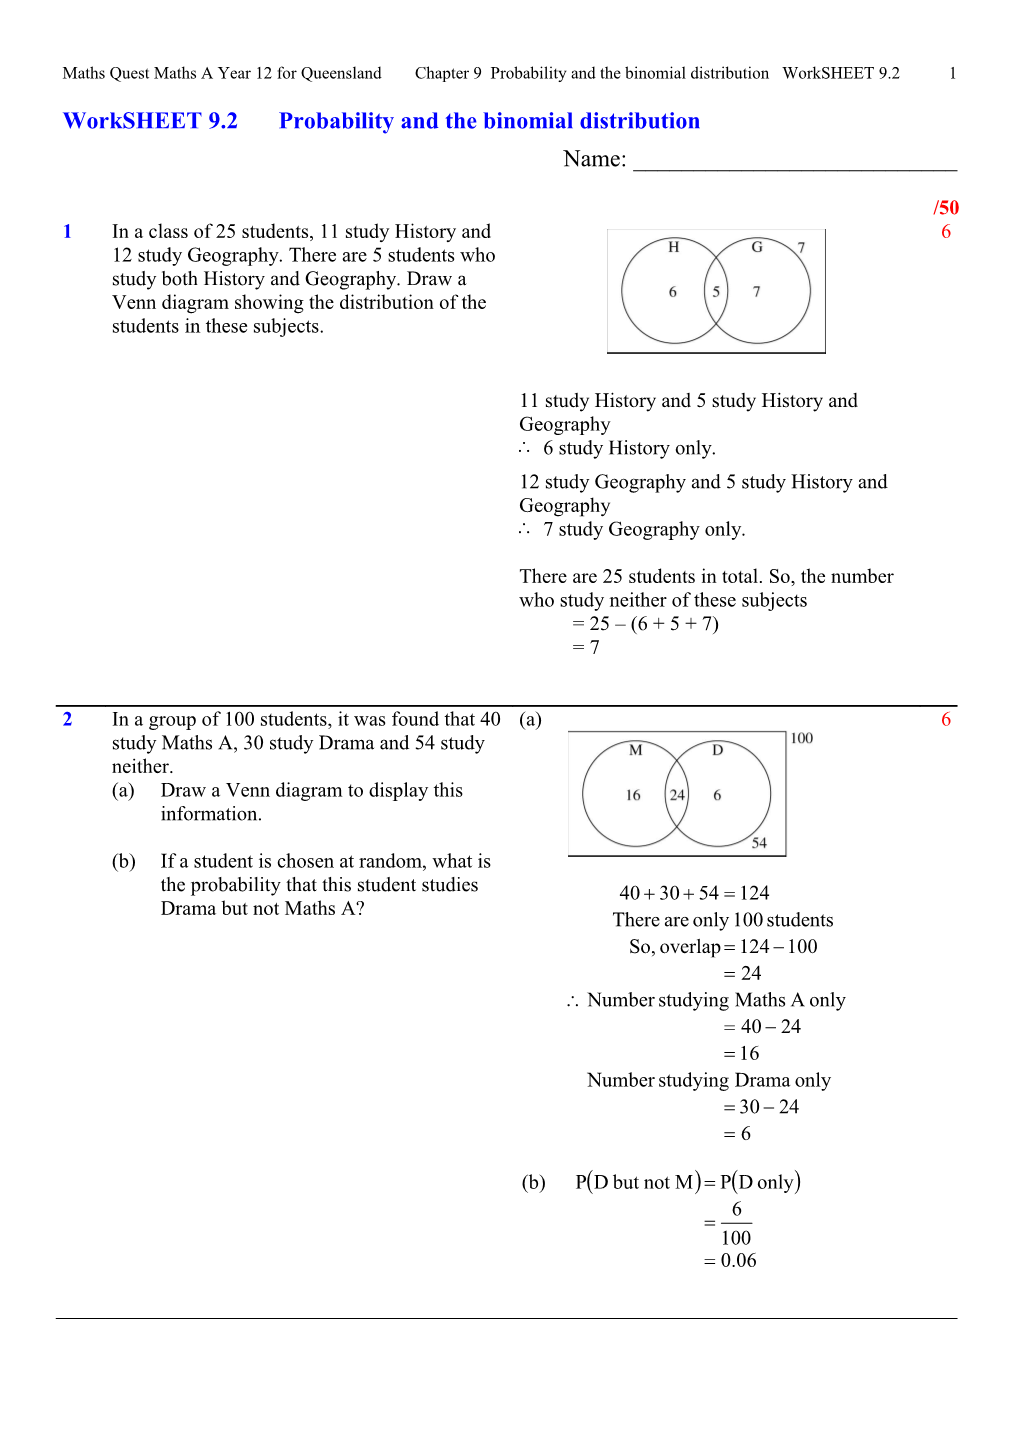 Worksheet 9.2 Probability and the Binomial Distribution